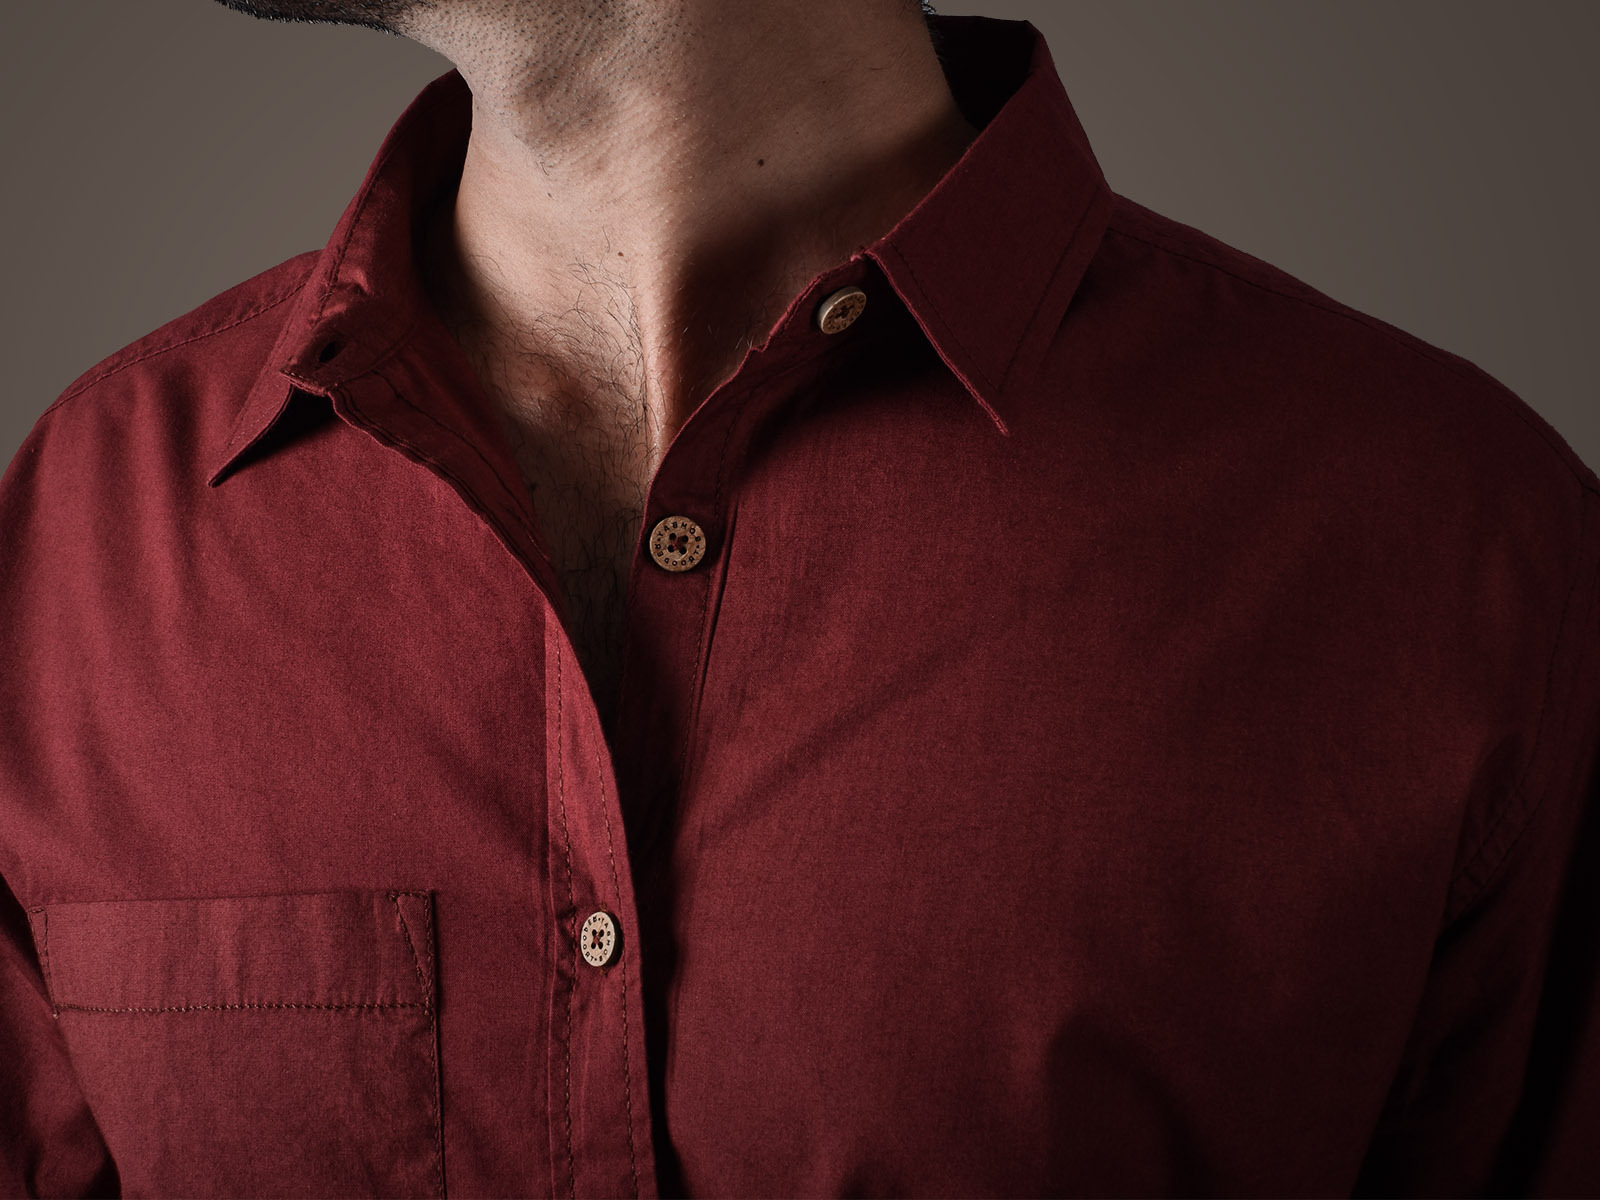 22-facts-about-bamboo-shirts